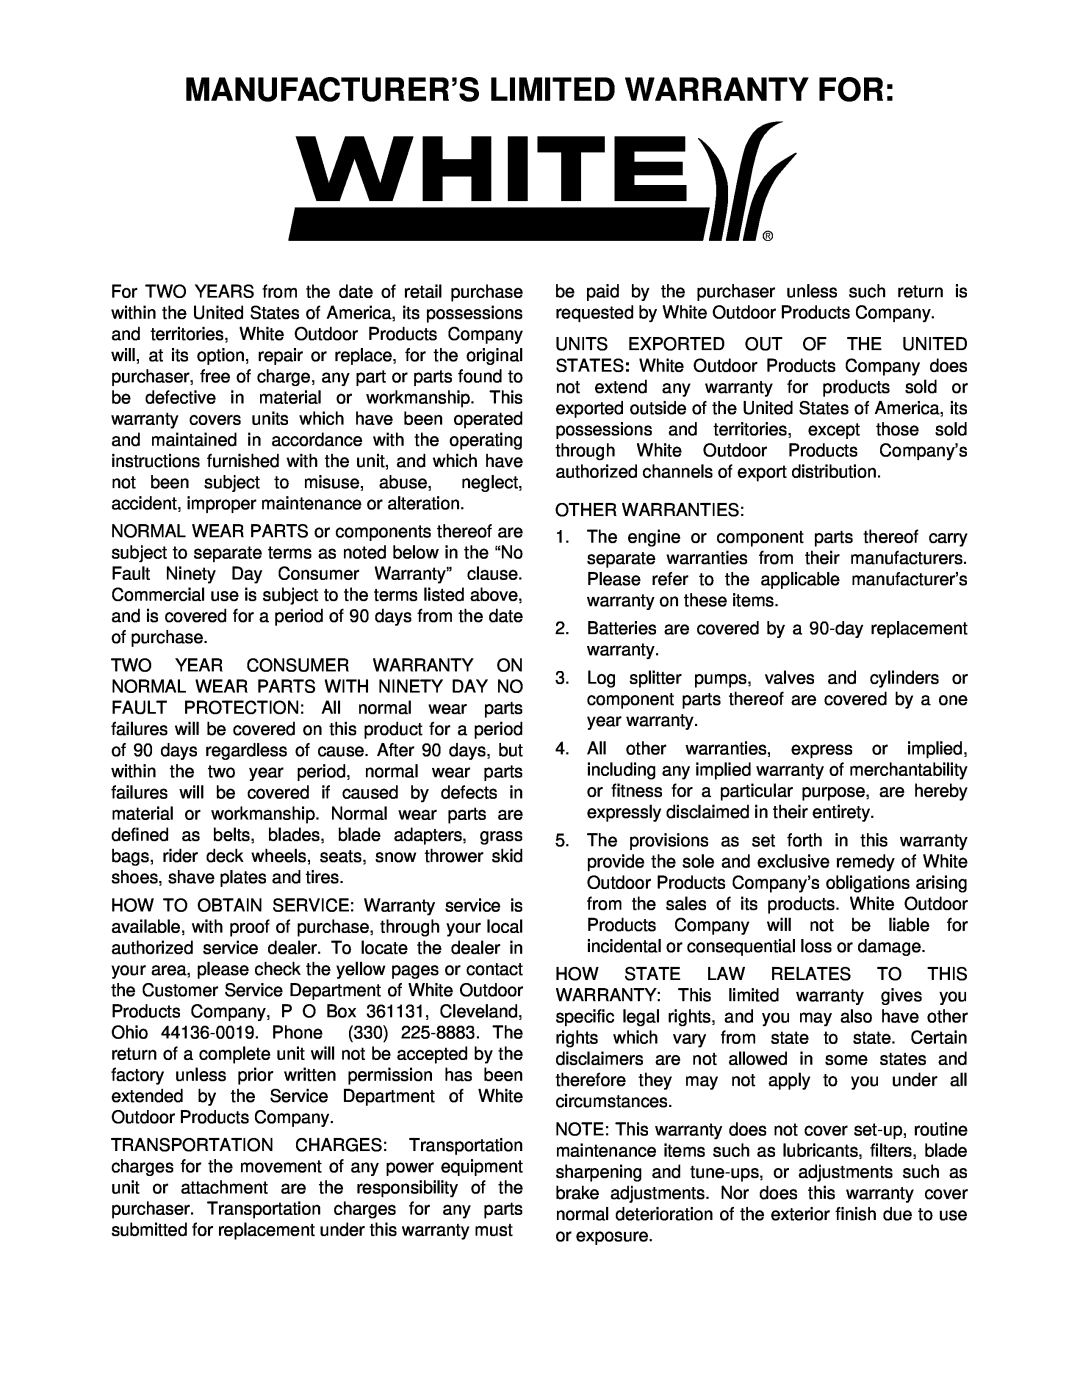 White 414 manual Manufacturer’S Limited Warranty For 